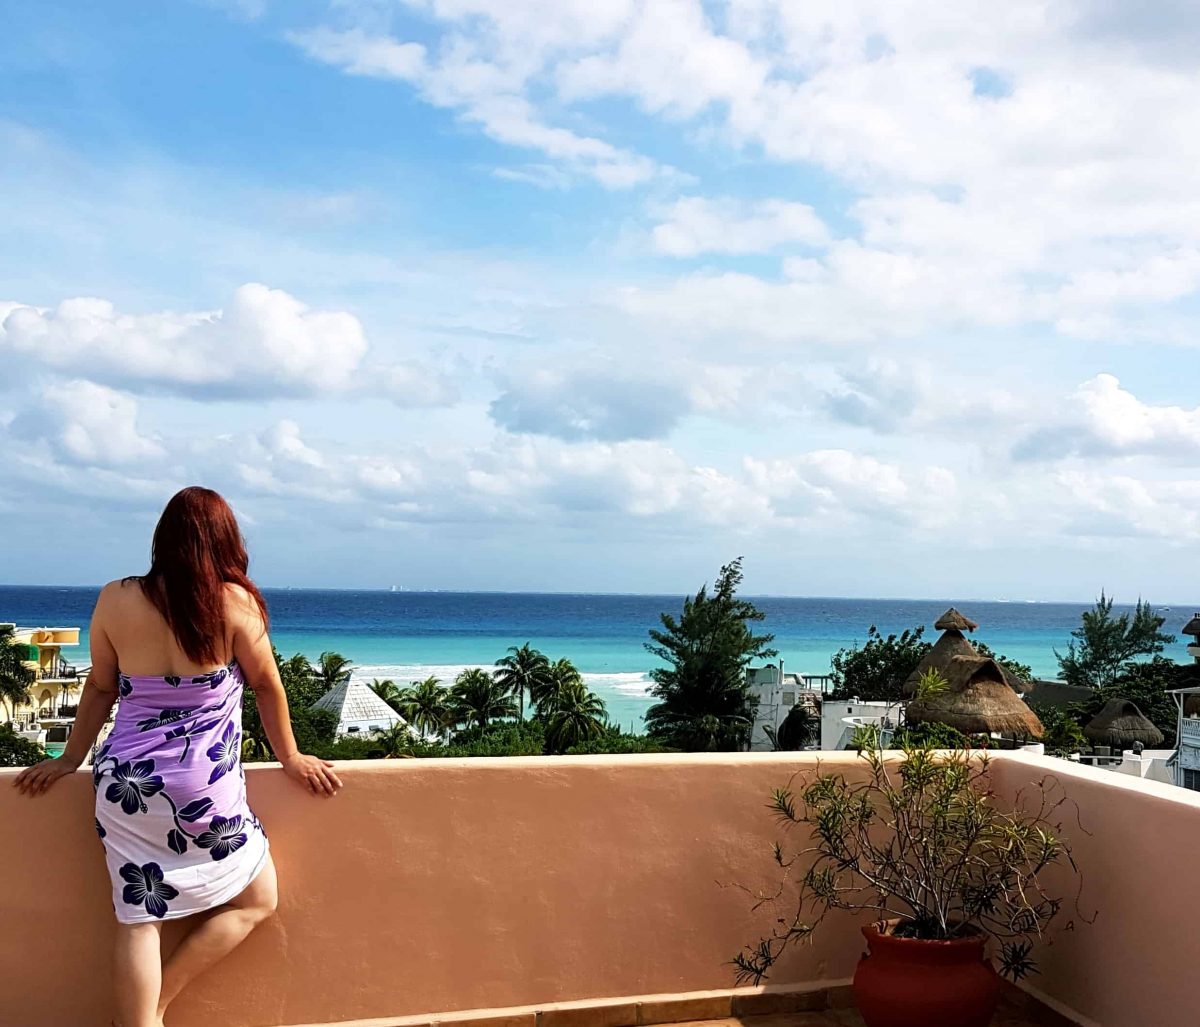 photo of me looking out on Caribbean taken with my tripod in Playa del Carmen